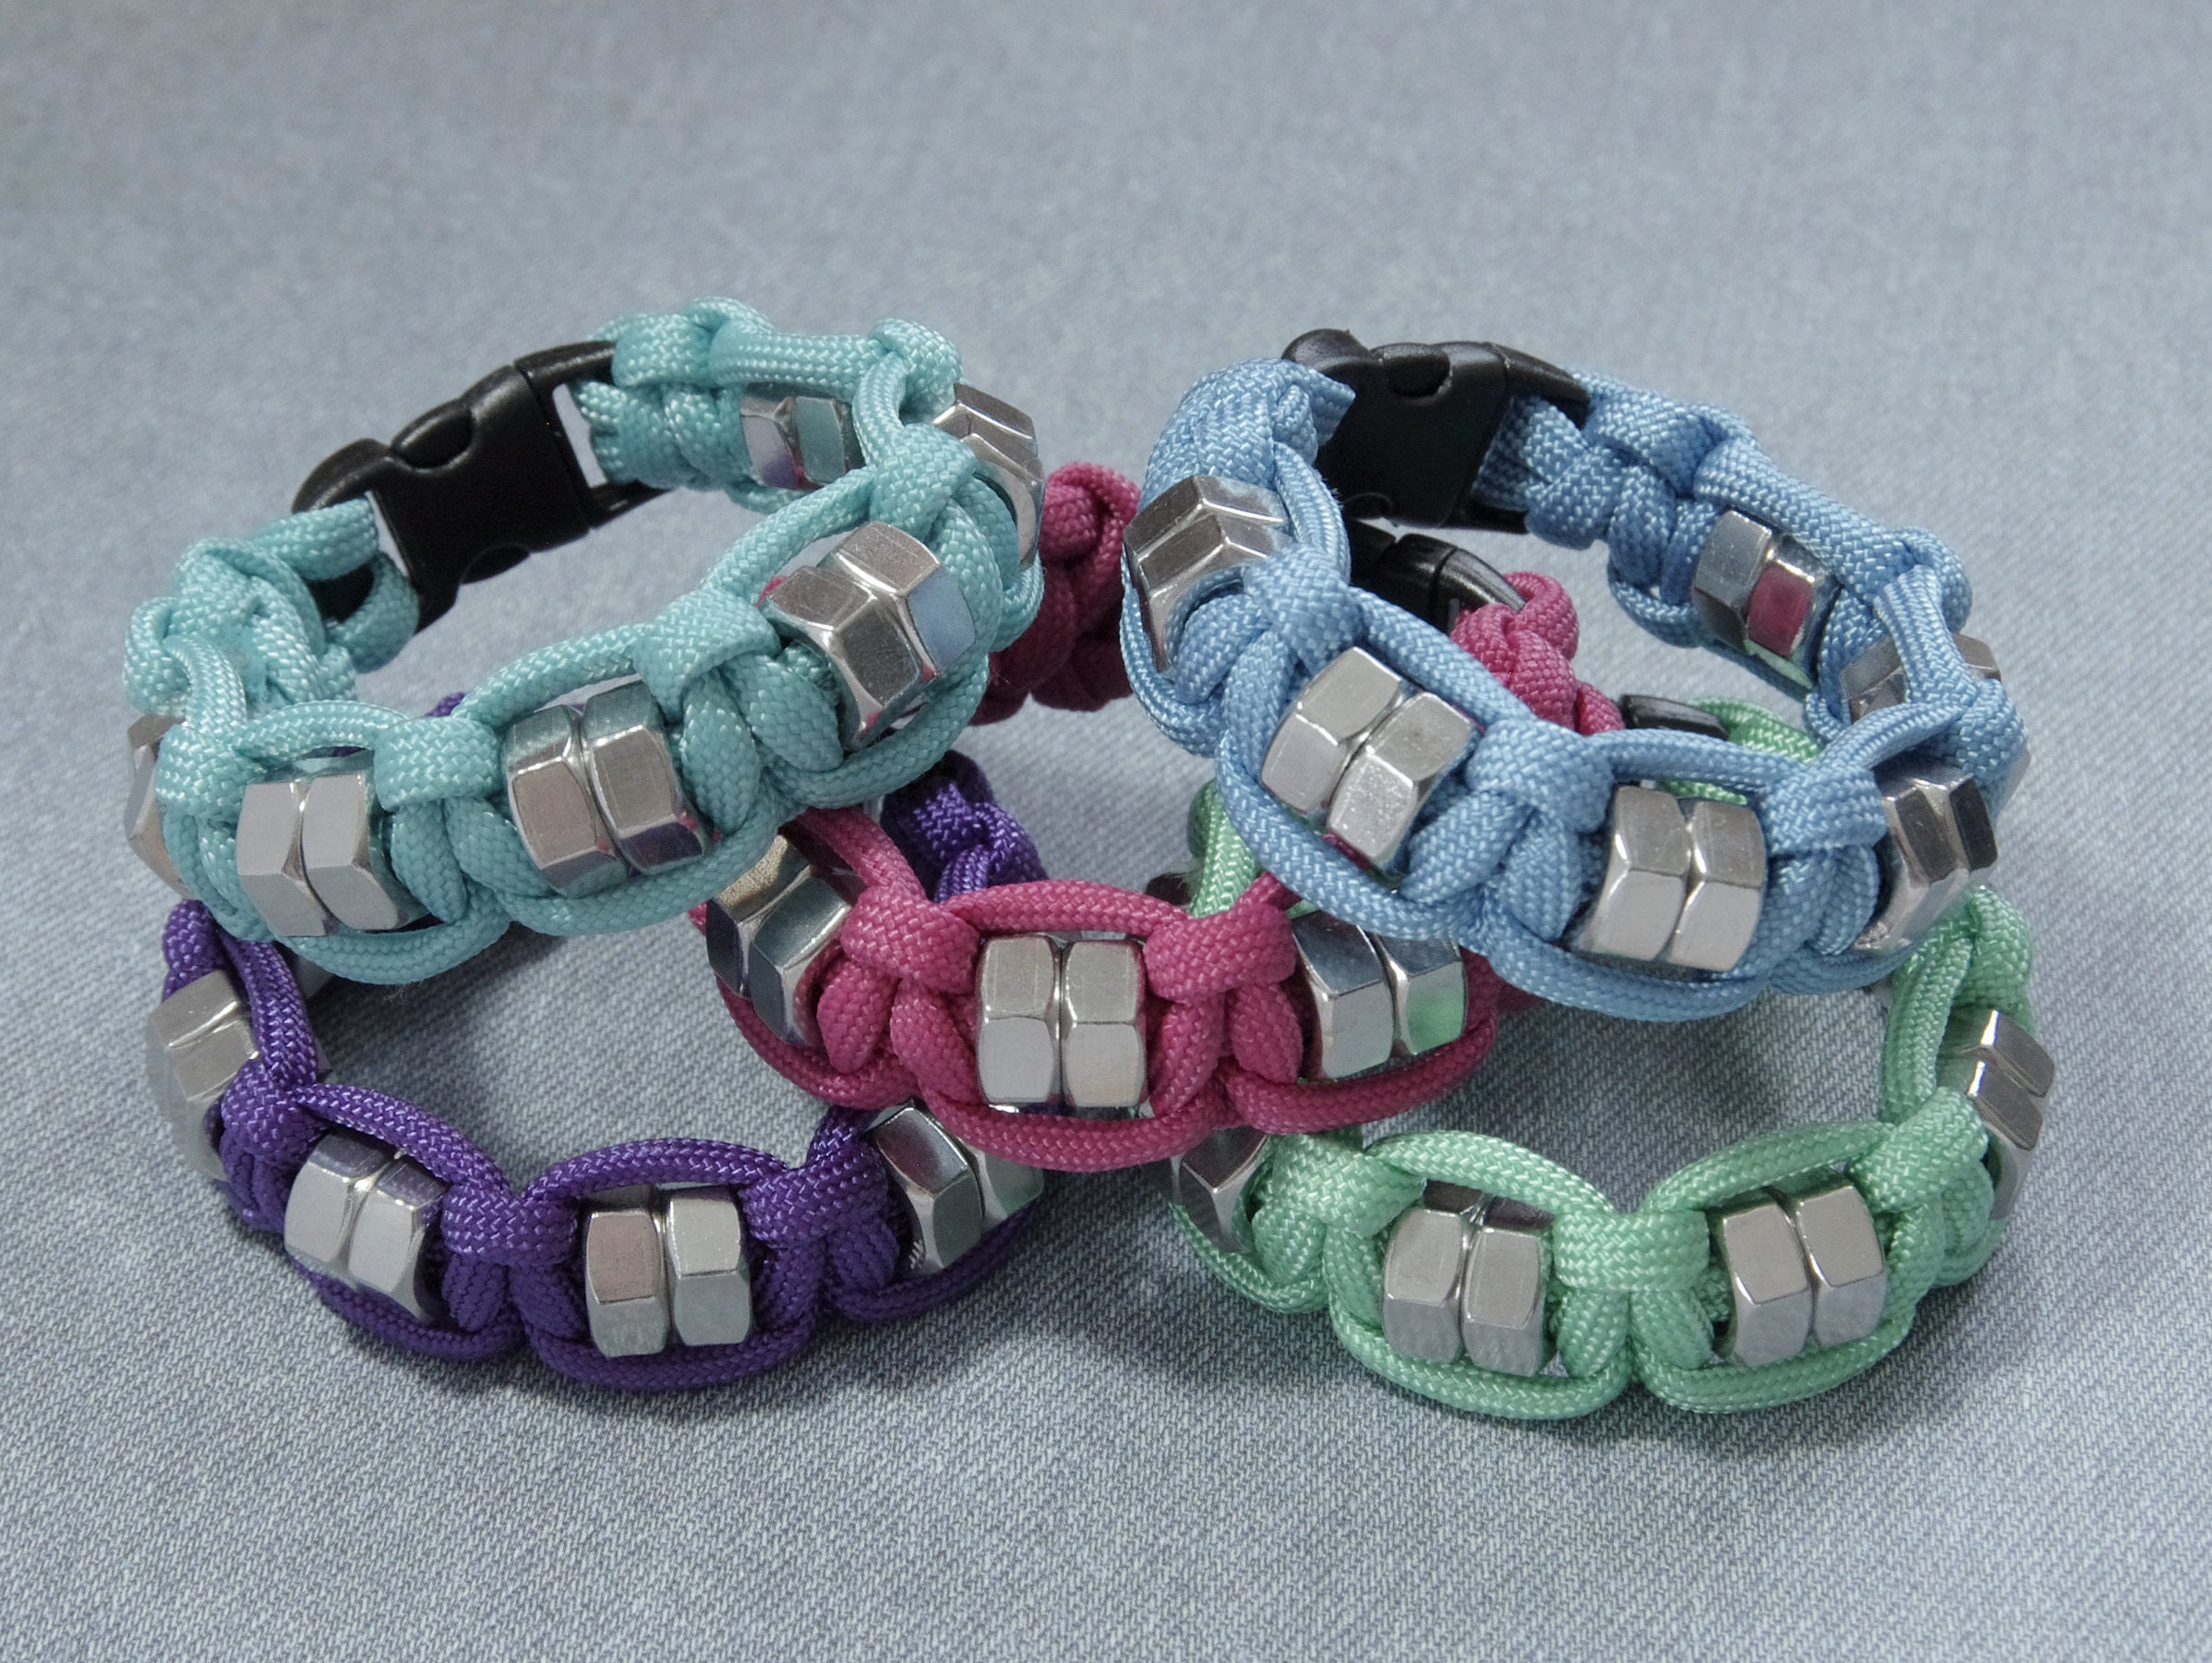 3 Bees & Me Paracord Bracelet Kit for Boys and Girls Complete DIY